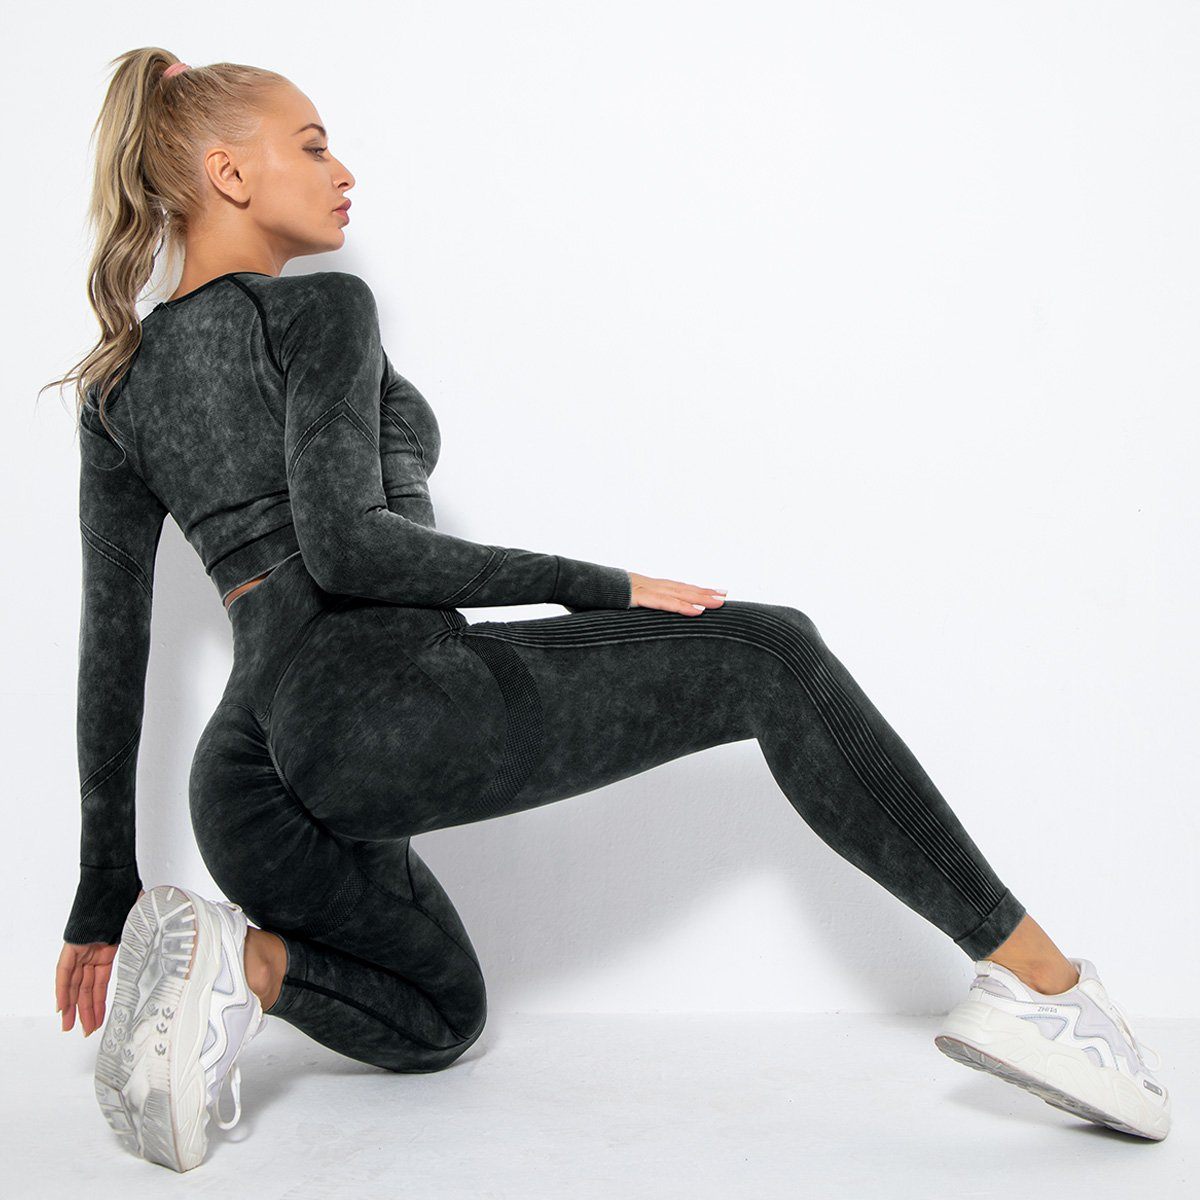 leggins push up, leggins push up Suppliers and Manufacturers at